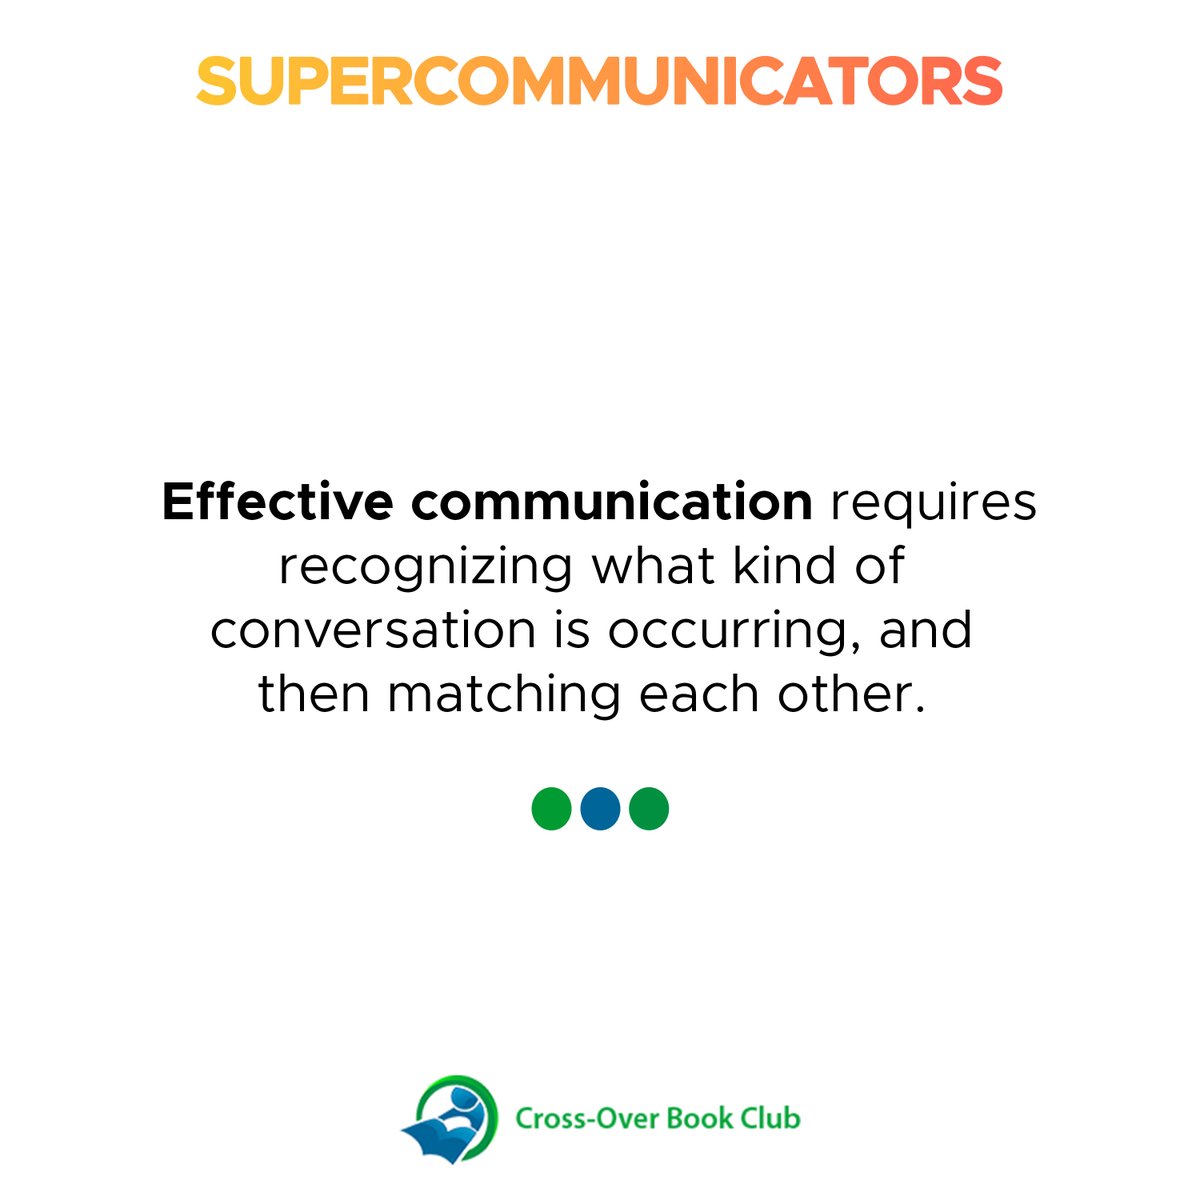 Effective communication requires recognizing what kind of conversation is occurring, and then matching each other.

#crossoverbookclub #April #readers #happyreading #supercommunicators #communication #charles #duhigg #book #conversation #match